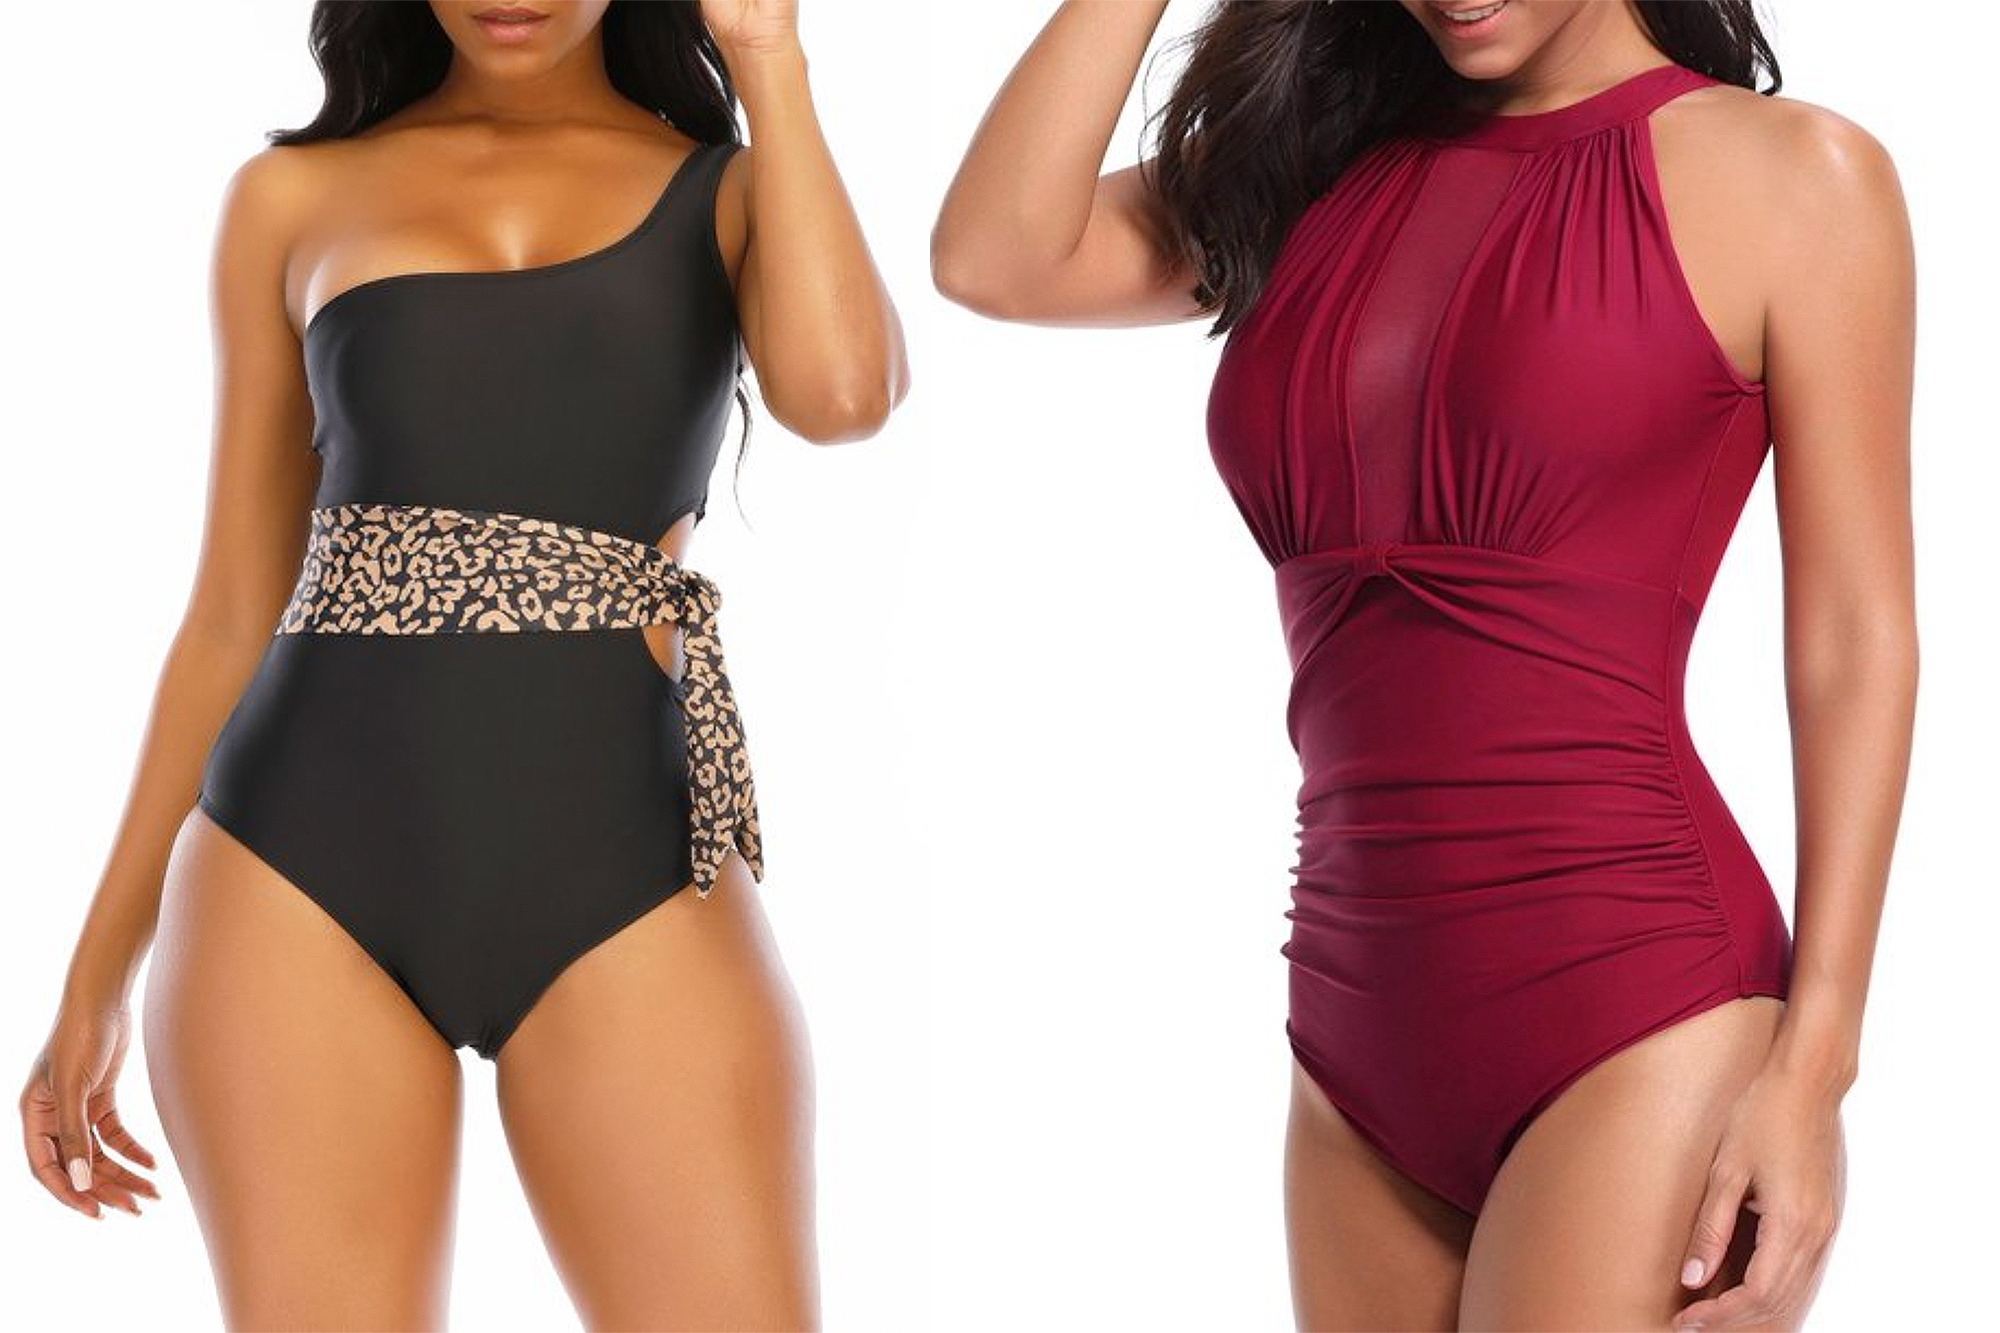 Walmart Has So Many Tummy-Control Swimsuits on Sale Right Now